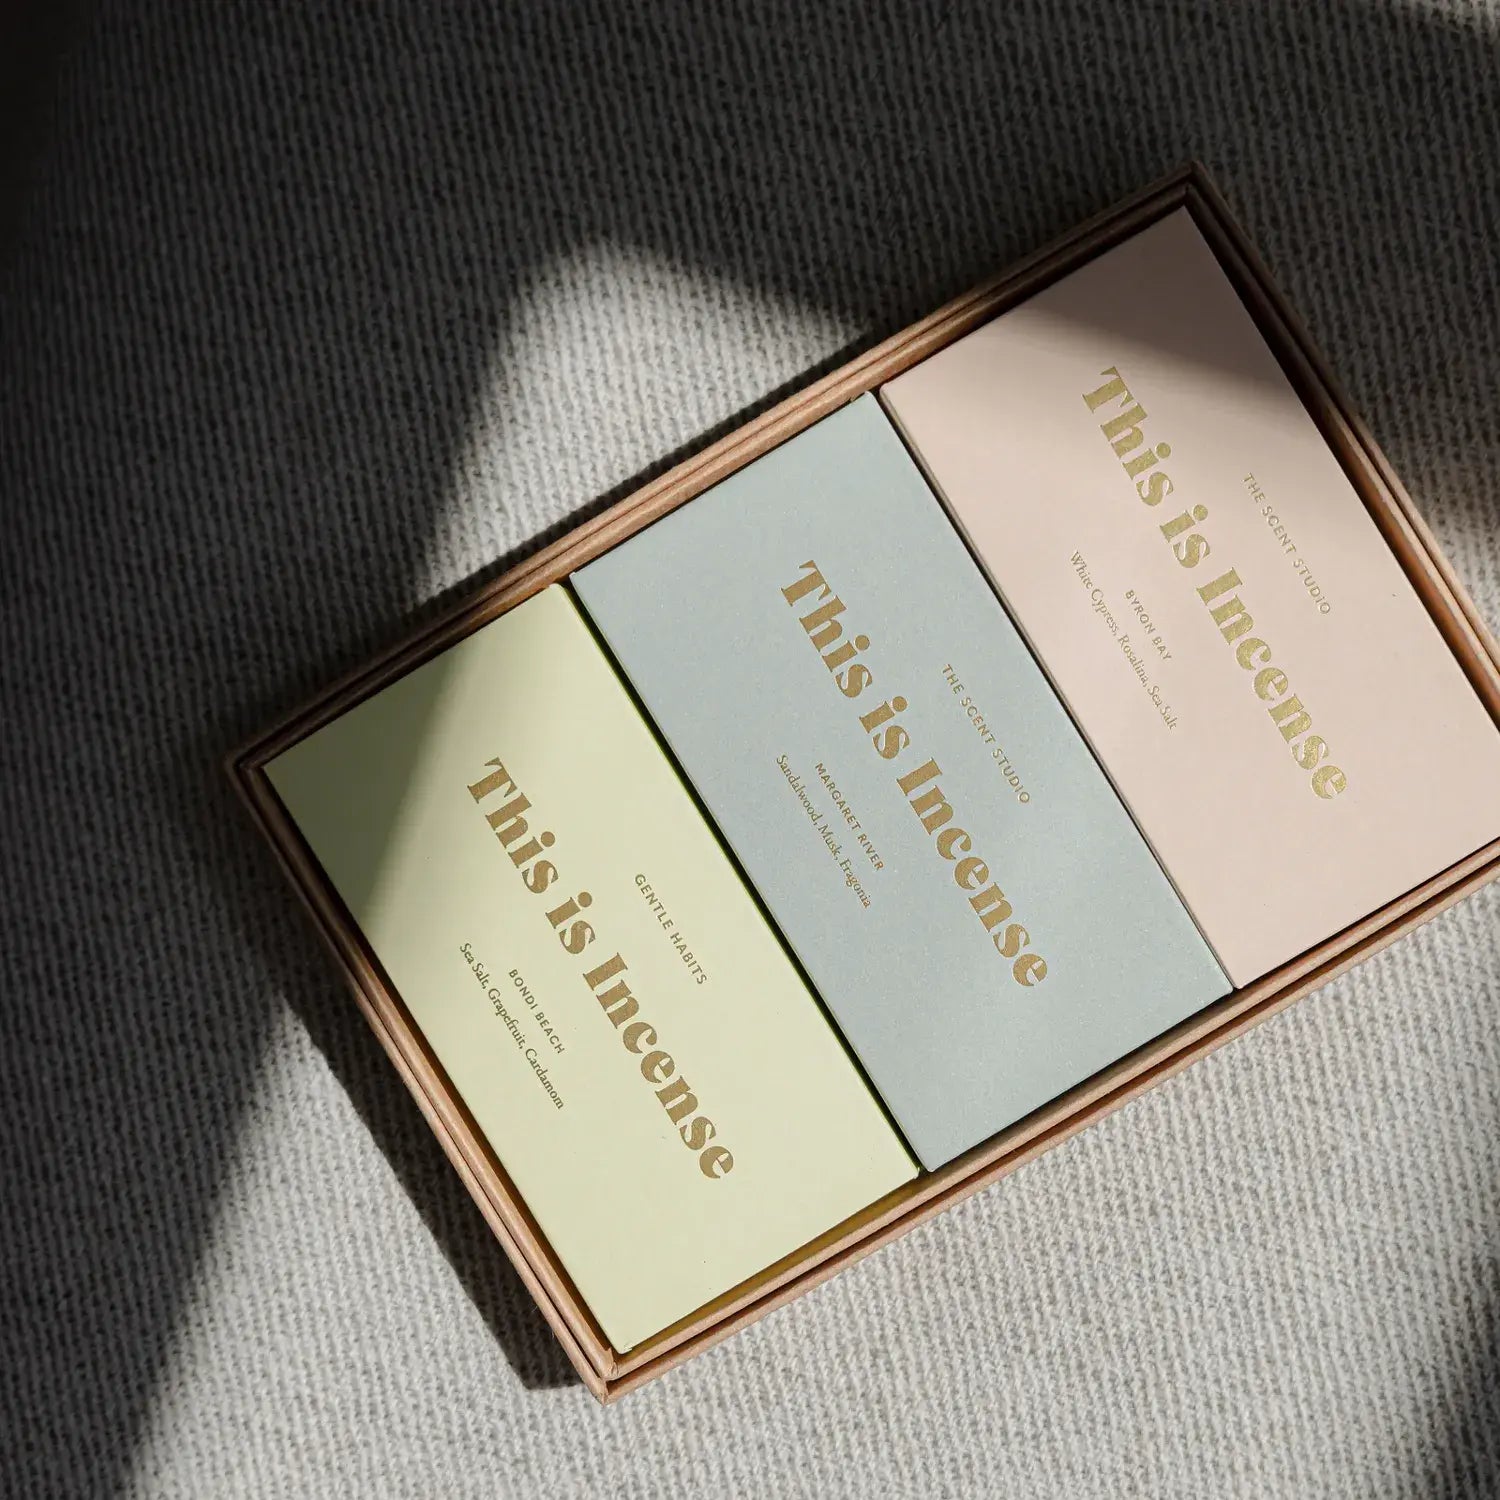 This is Incense by Gentle Habits - Bondi Beach Incense